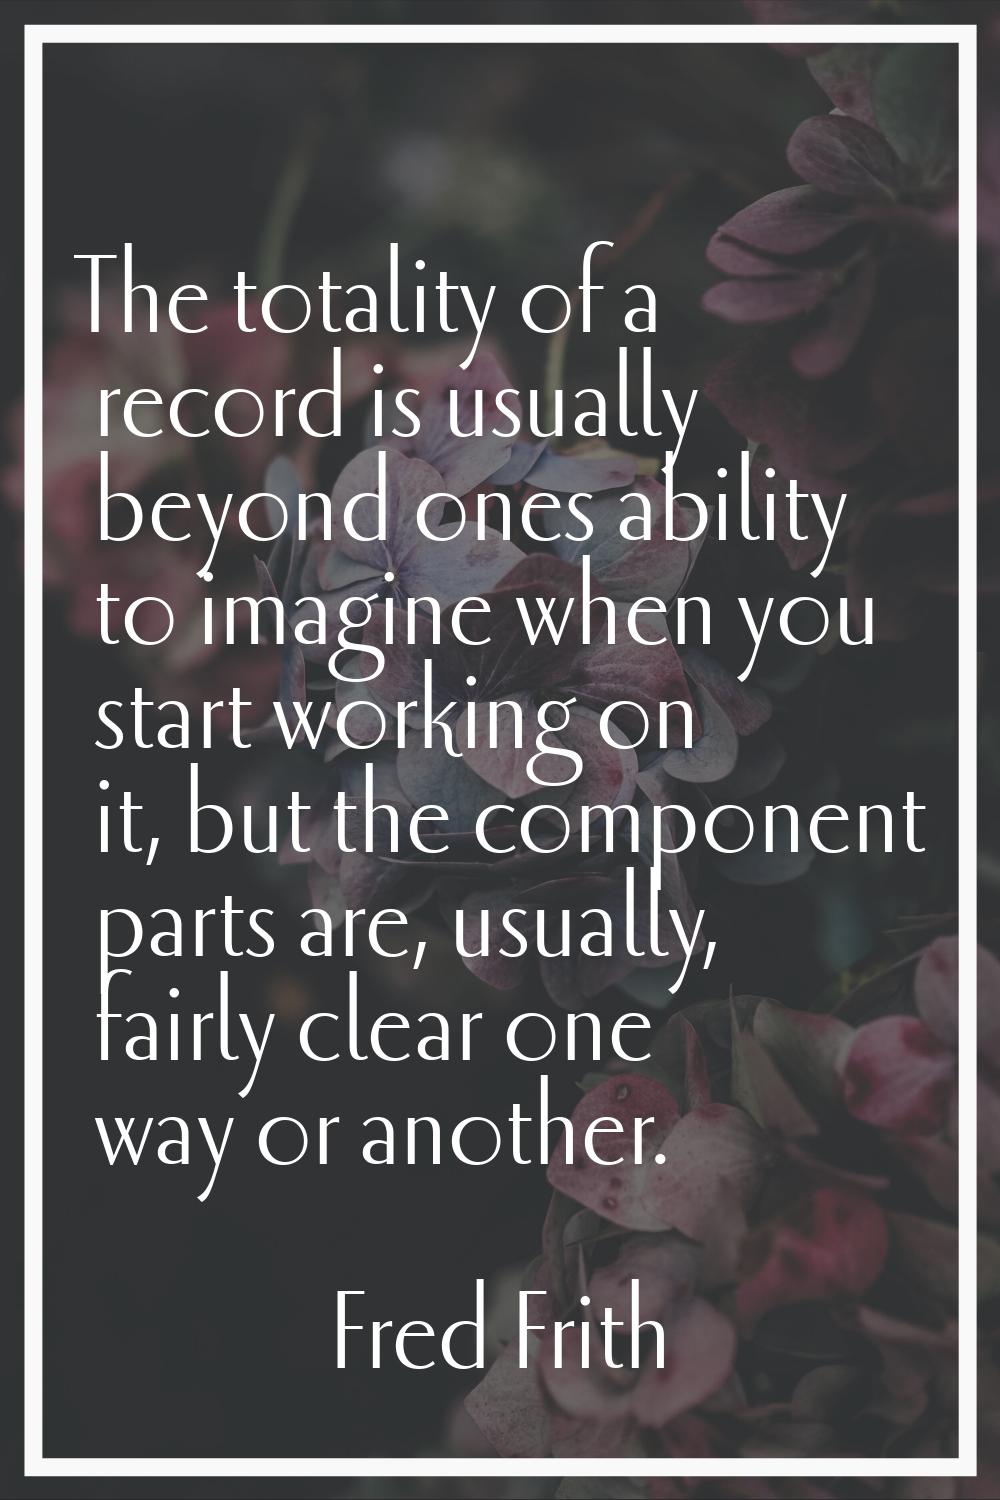 The totality of a record is usually beyond ones ability to imagine when you start working on it, bu